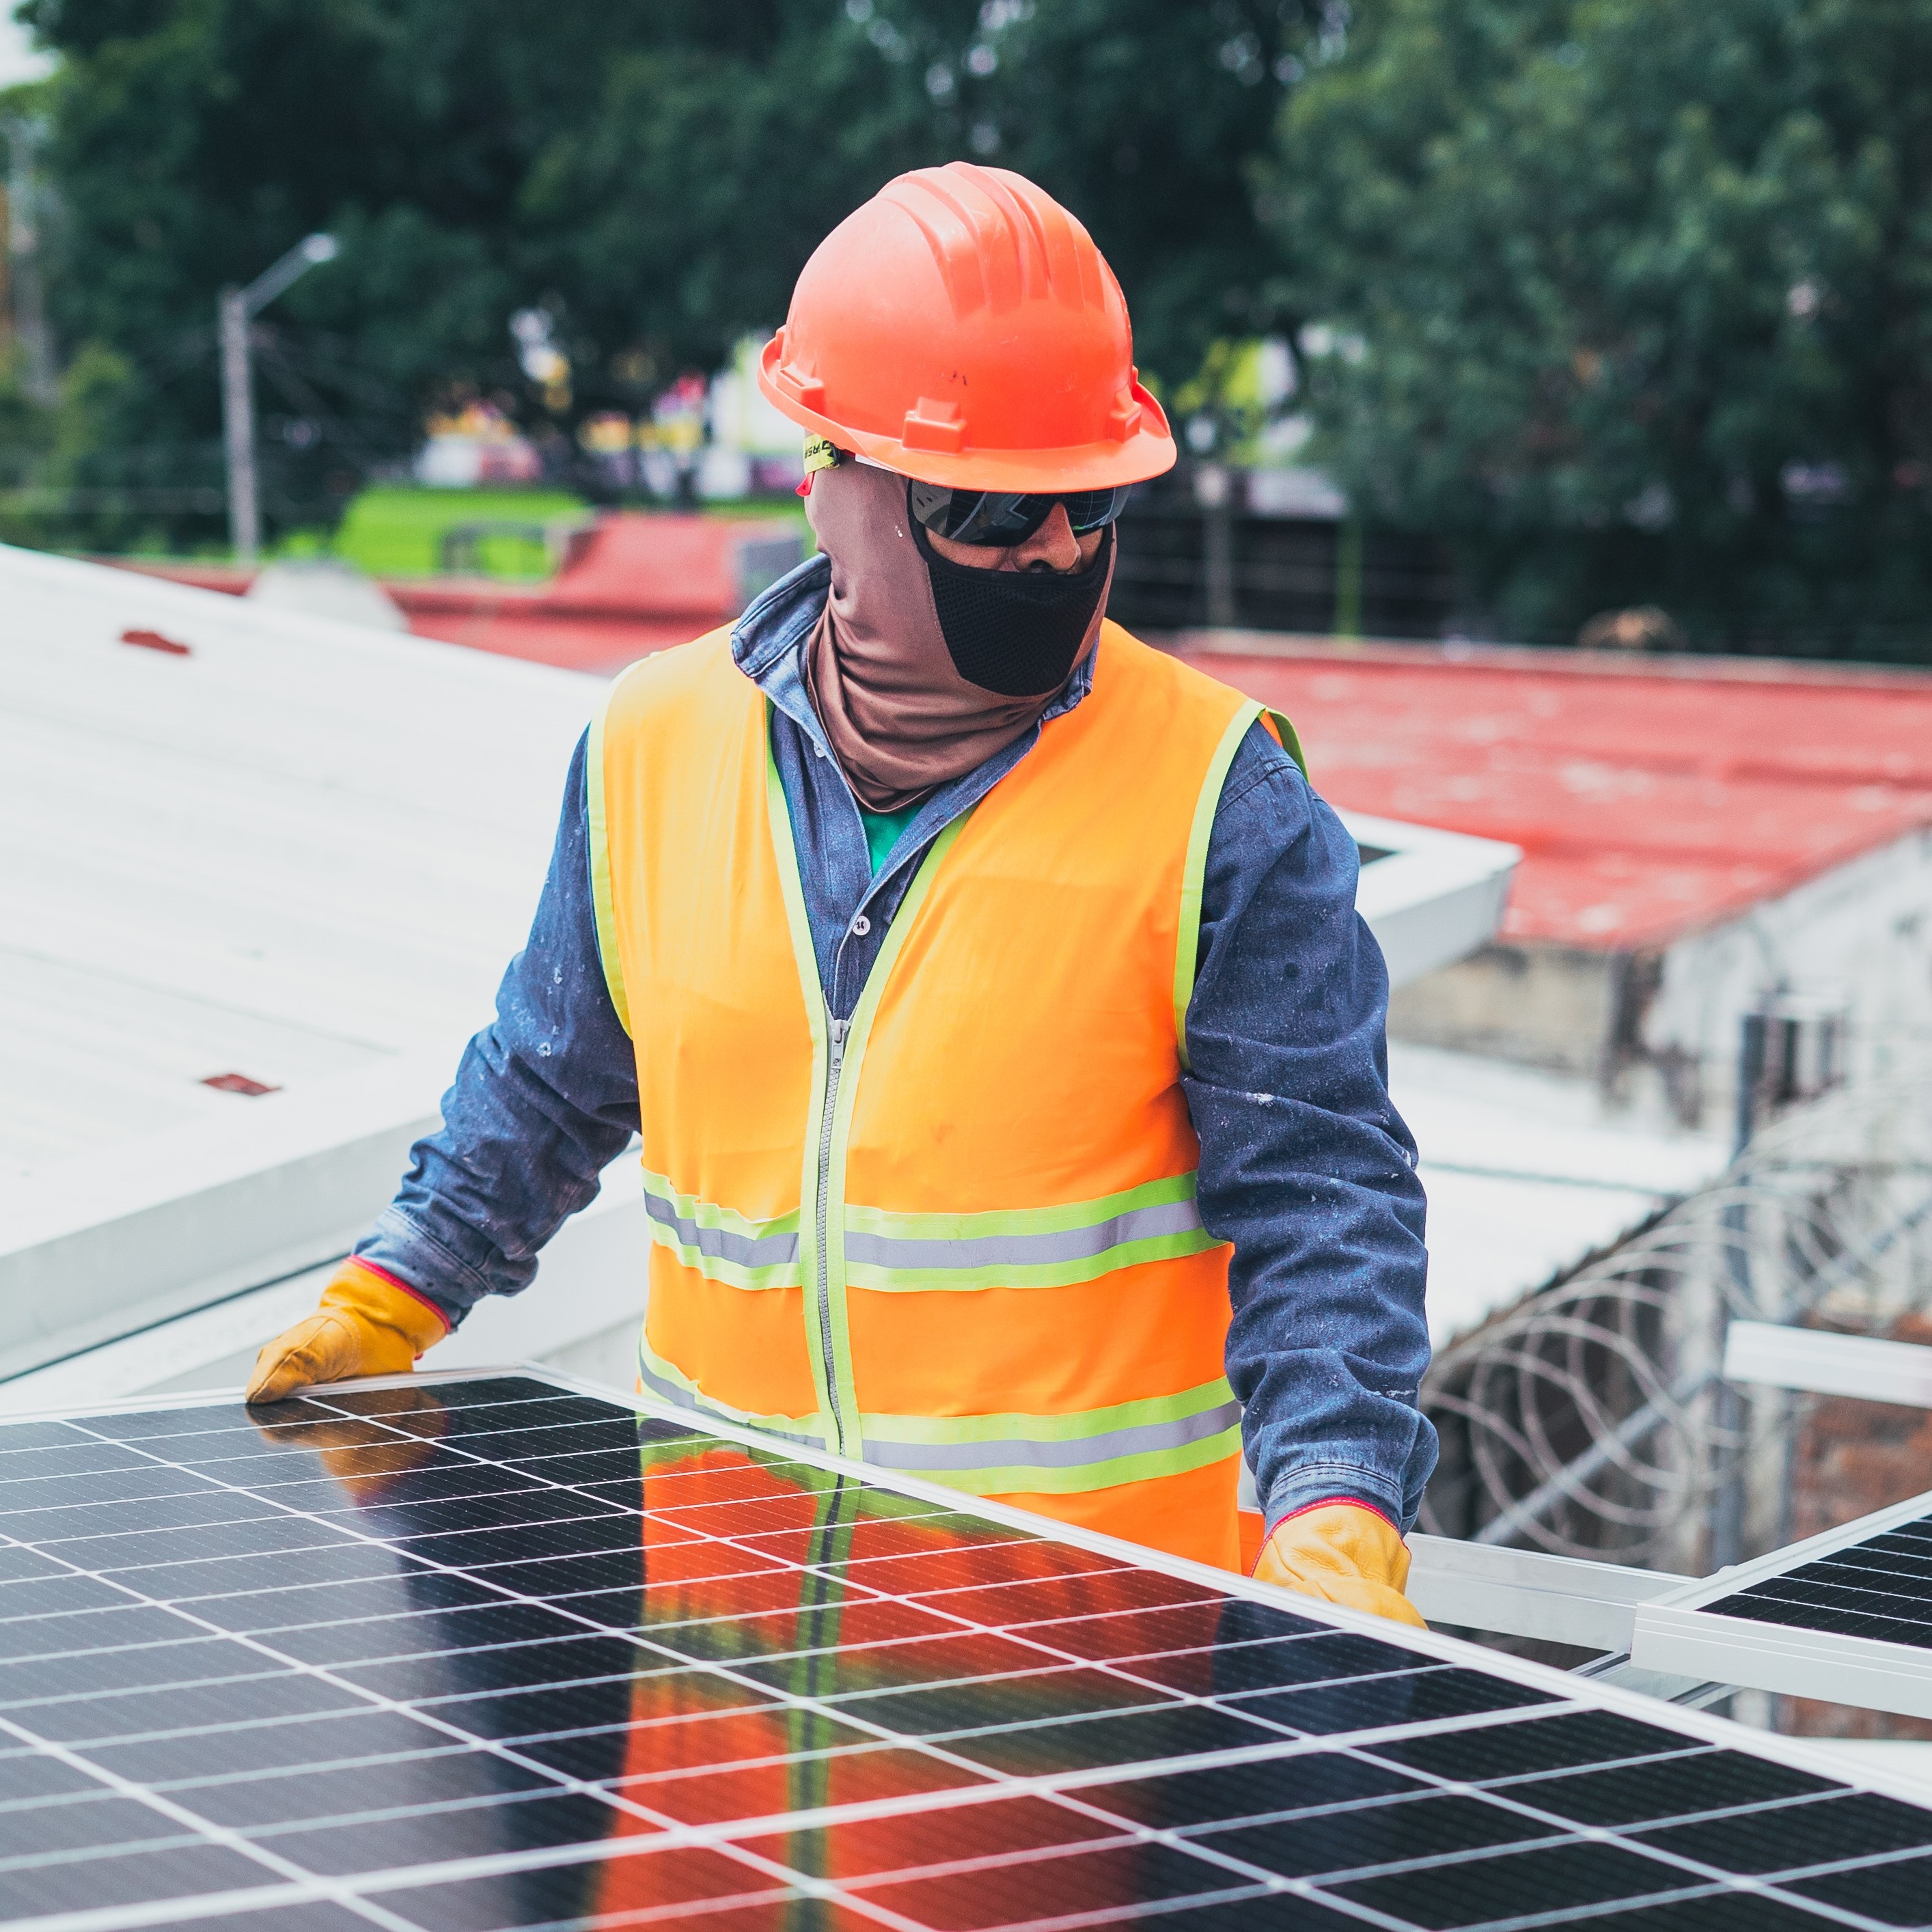 A worker in a reflective vest and hard hat carries a solar panel